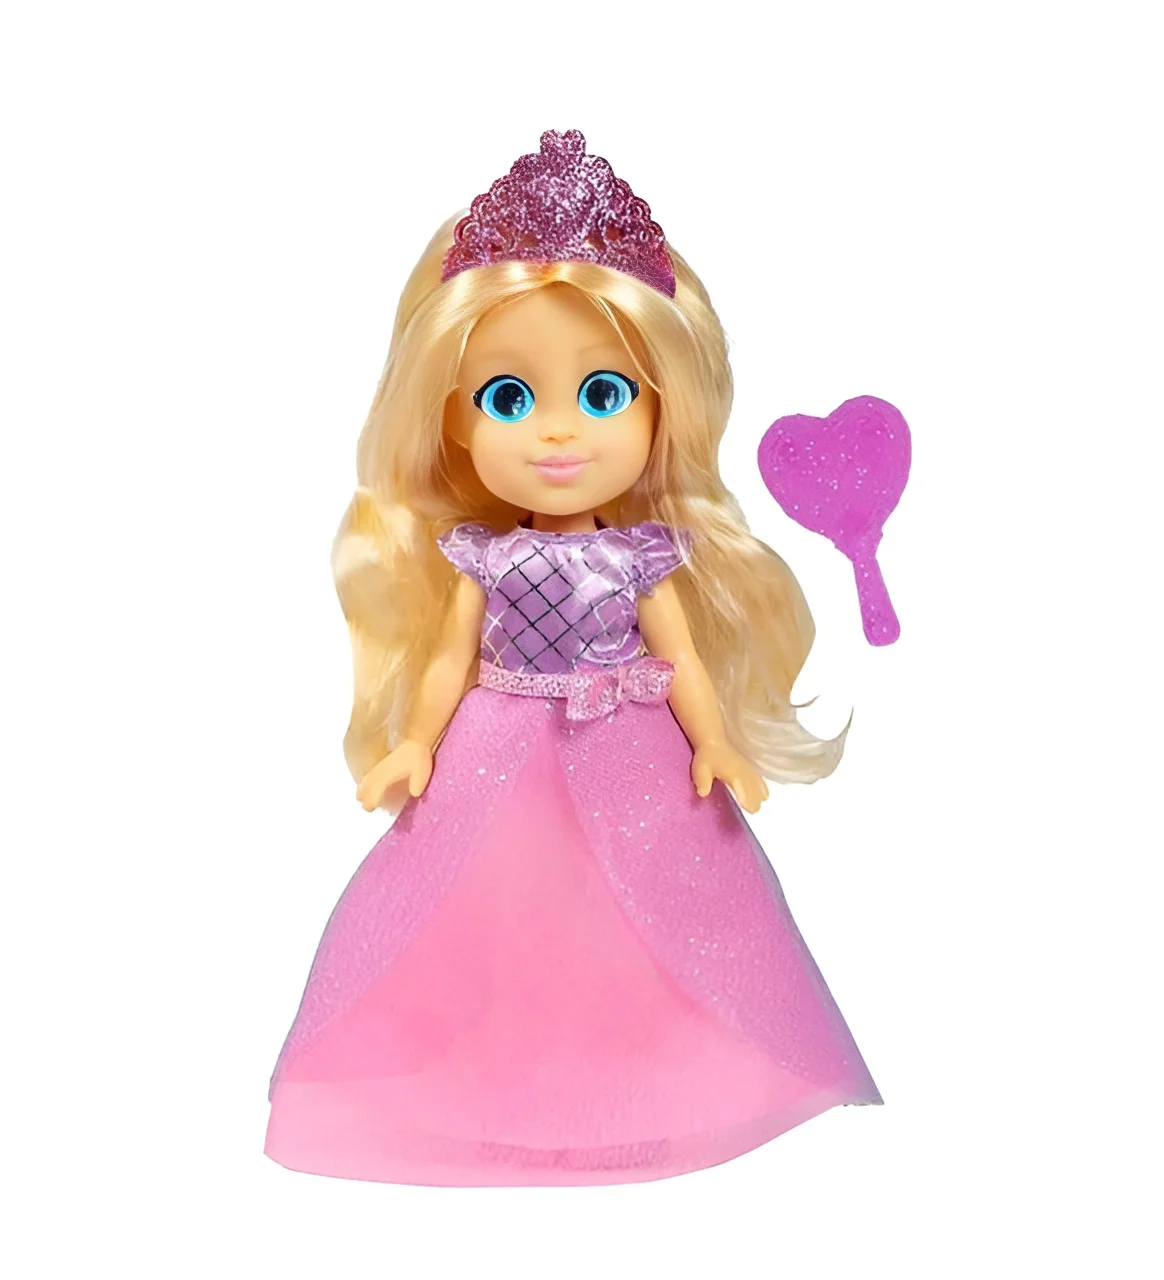 Love Diana Cloth Doll 15 Cm Toy Children Toy Mom & Kids Profession Groups Doctor Princess And Birthday Baby Fun Game джаз ume usm krall diana the look of love